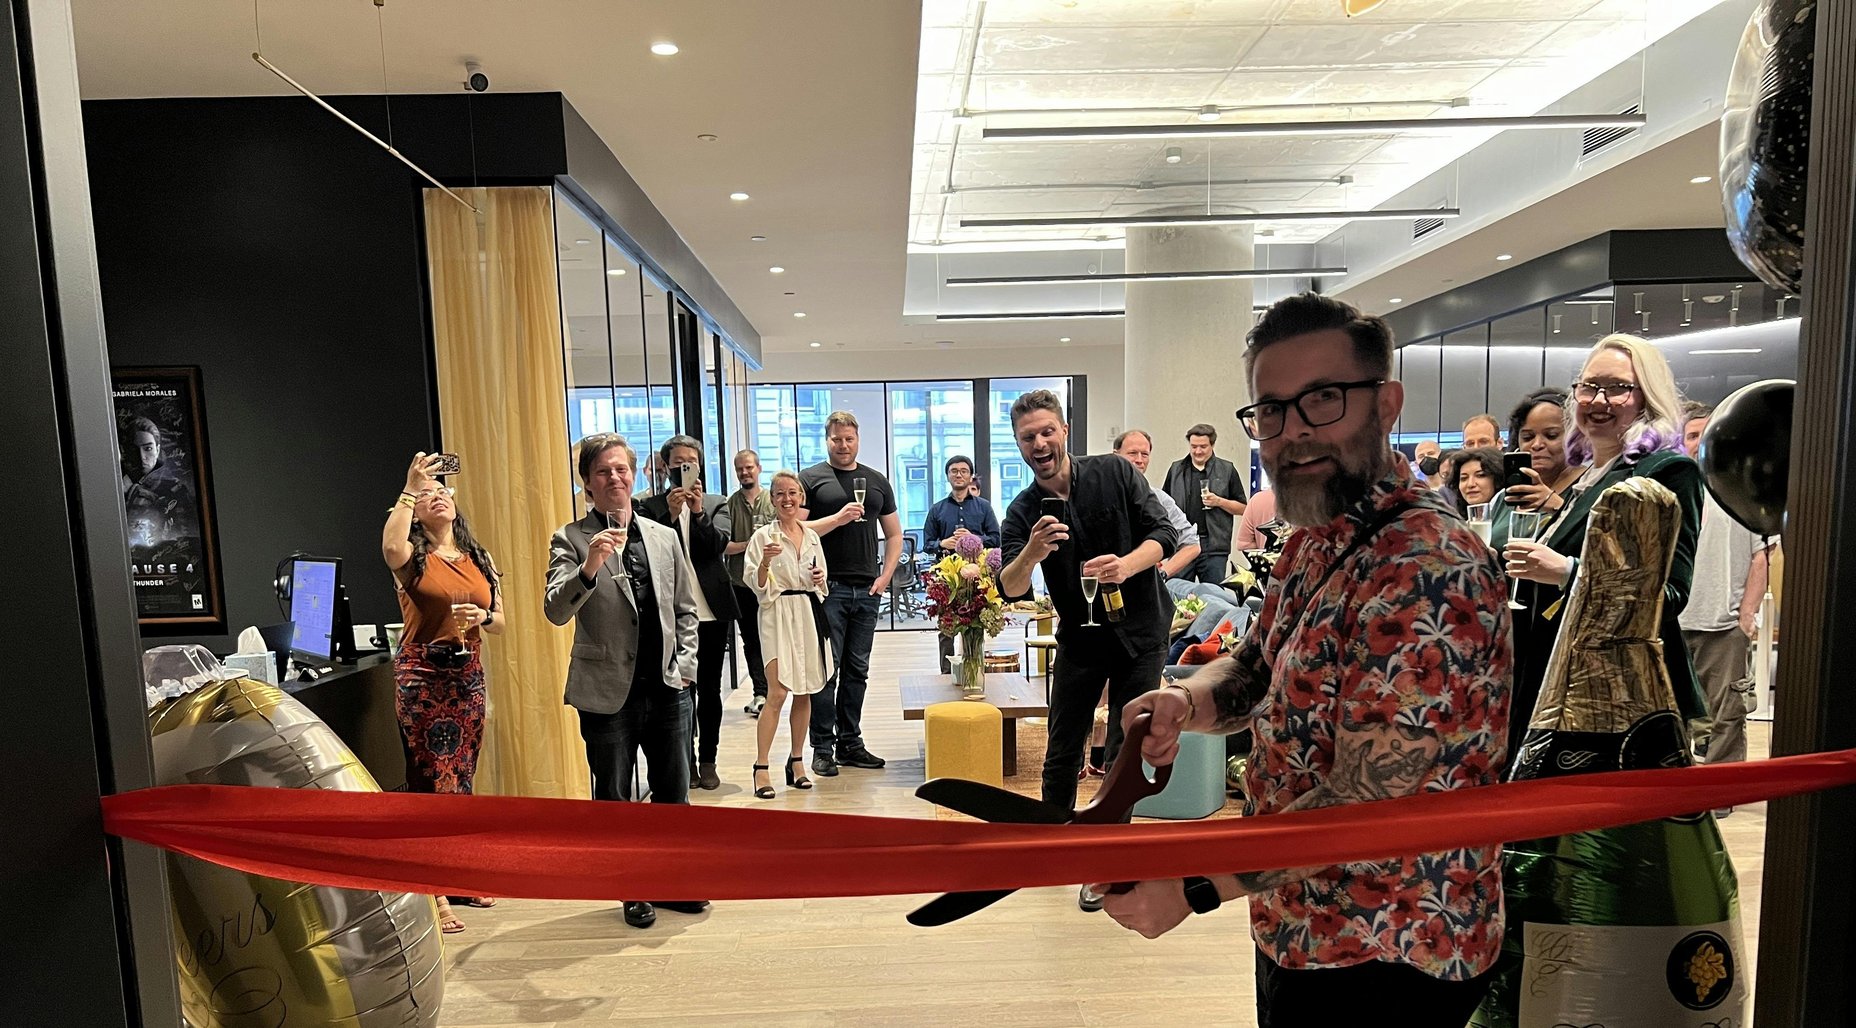 Pim Holfve, CEO of Avalanche Studios Group, inaugurates the new location